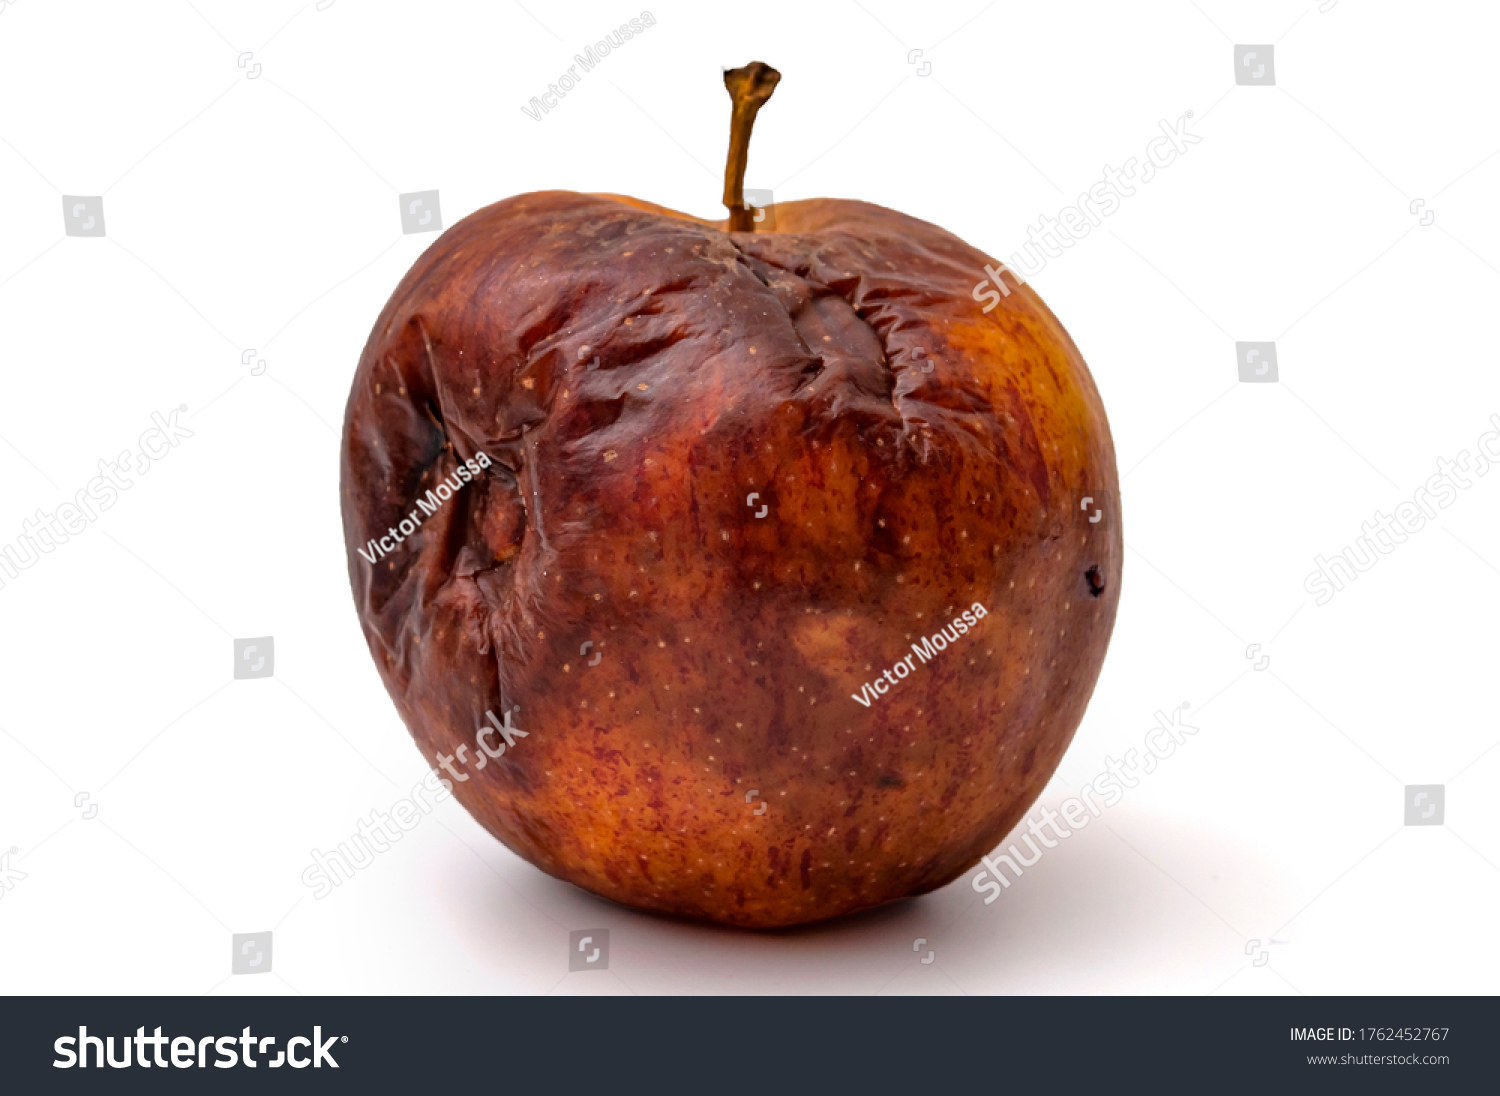 Rotting apples, decay and food waste concept with photograph of unhealthy decayed bad apple isolated on white background with clipping path cutout #1762452767